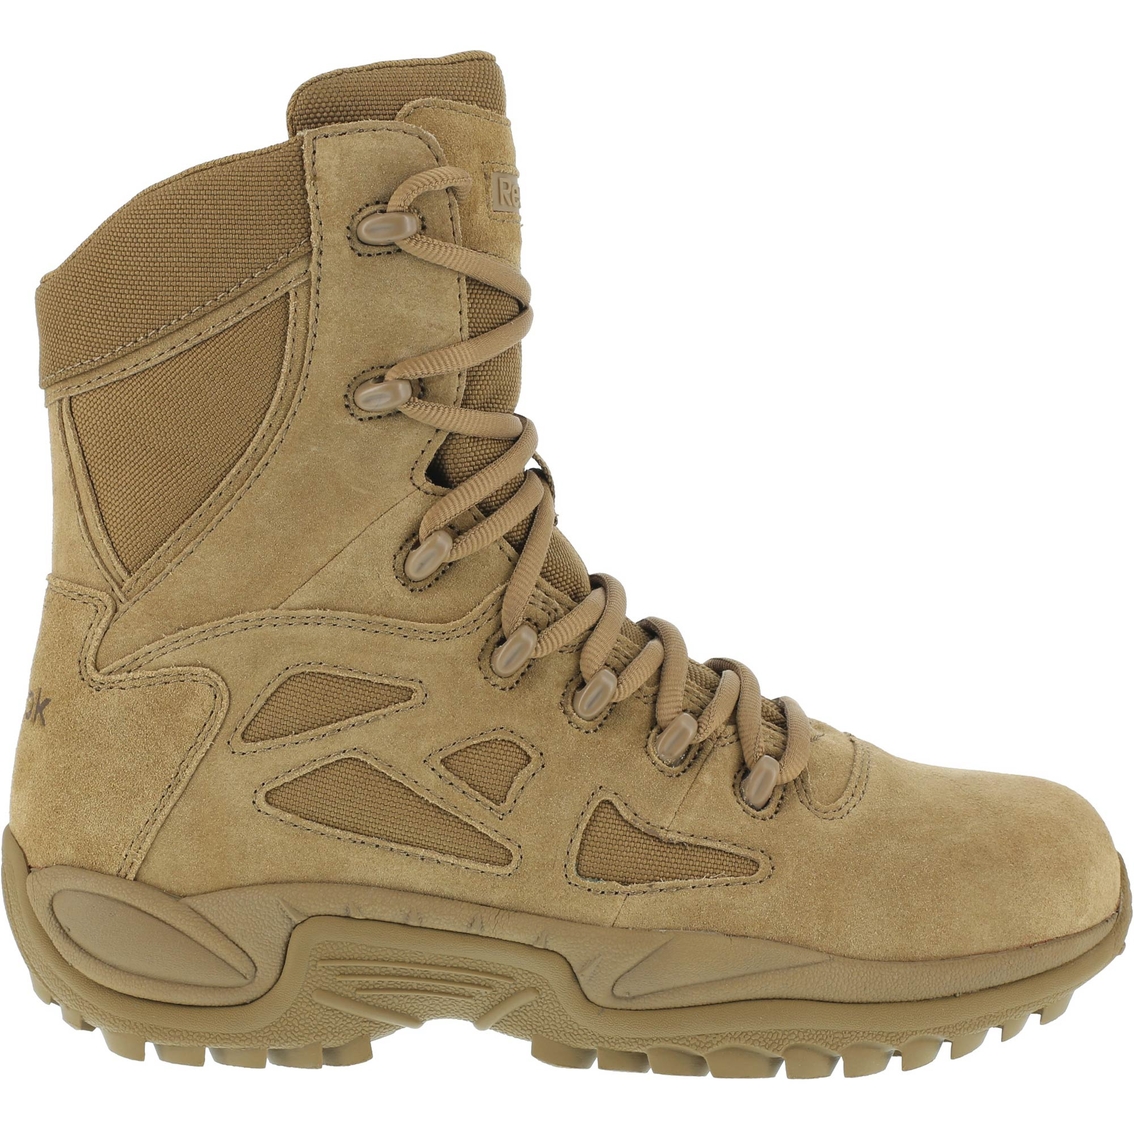 Reebok Men's Rapid Response Ar670-1 Compliant Boots | Military Approved ...